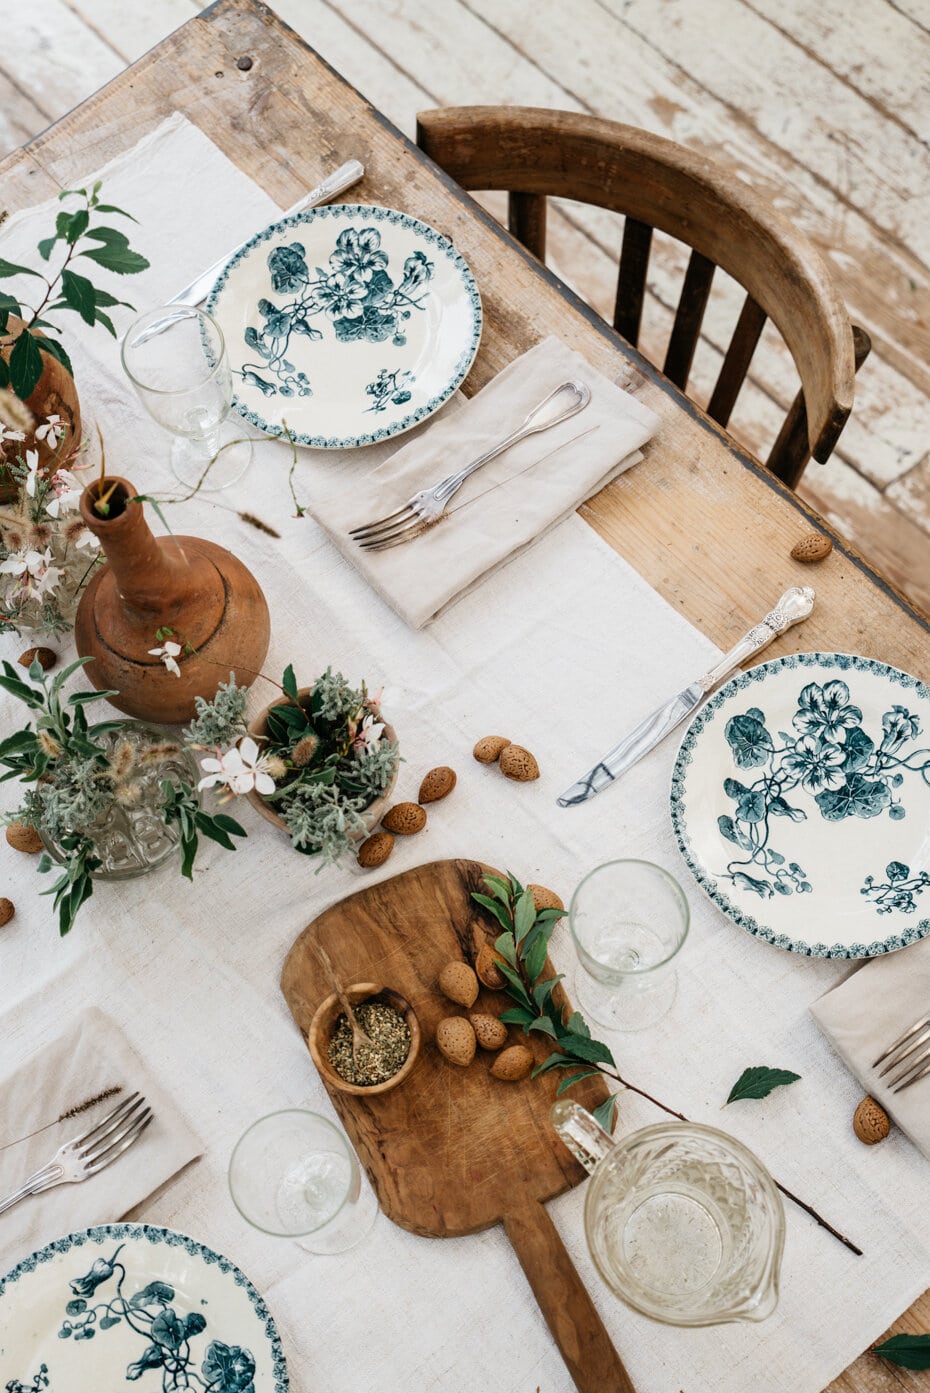 A rustic table with chippy white paint, blue and white vintage plates and beige linen napkins for place settings. VIntage cutting boards and wood candlesticks and eucalyptus leaves for the center of the table. 